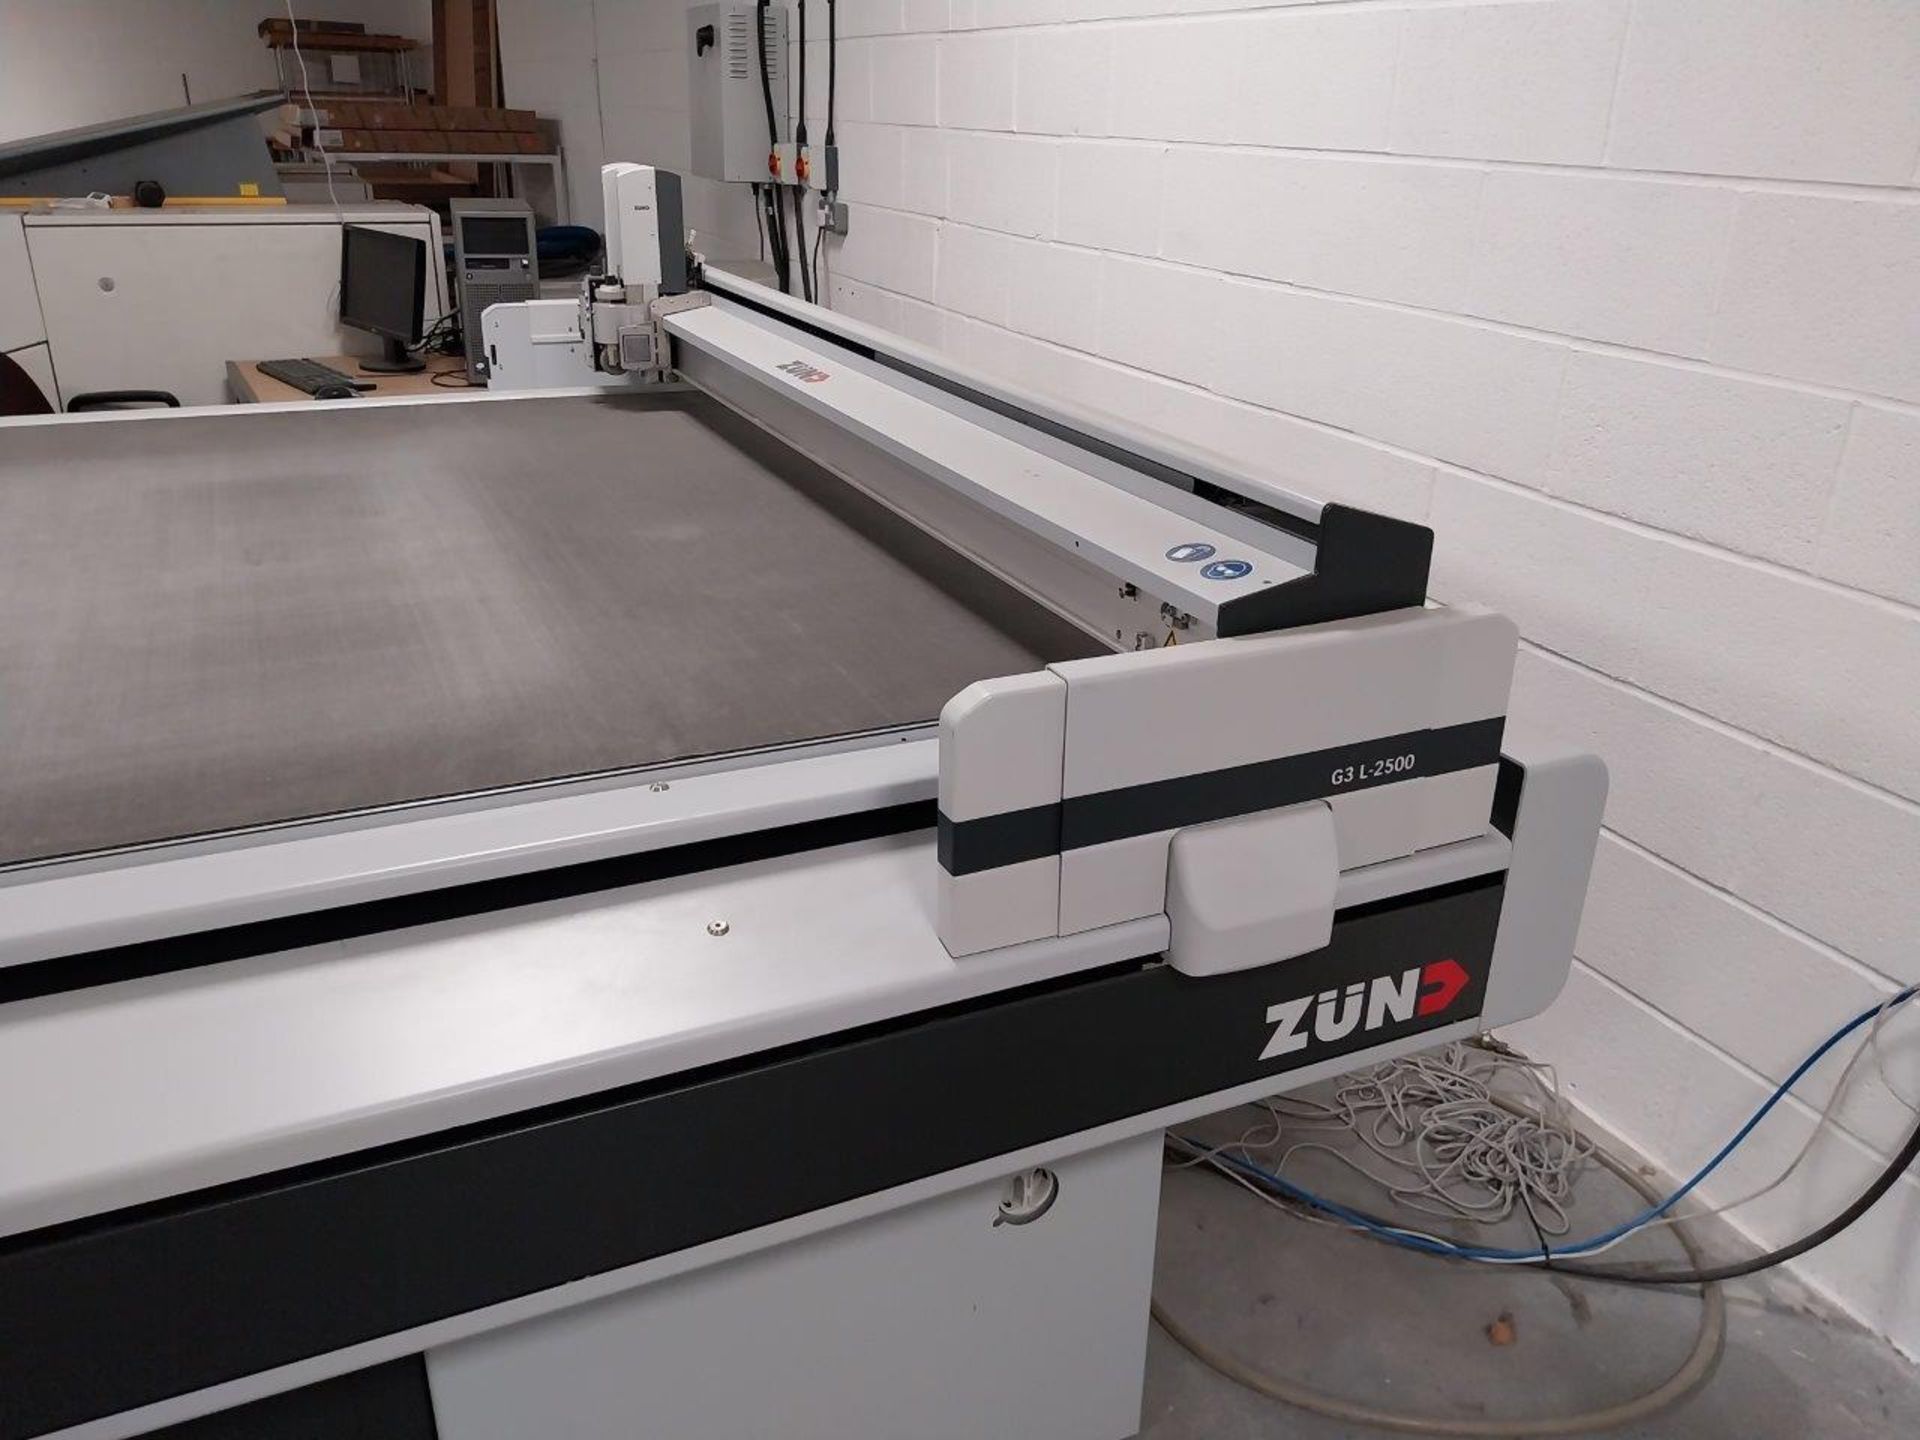 ZUND G3 L-2500 flatbed digital cutting table, cutting width 1800mm, cutting length 2500mm, overall - Image 6 of 13